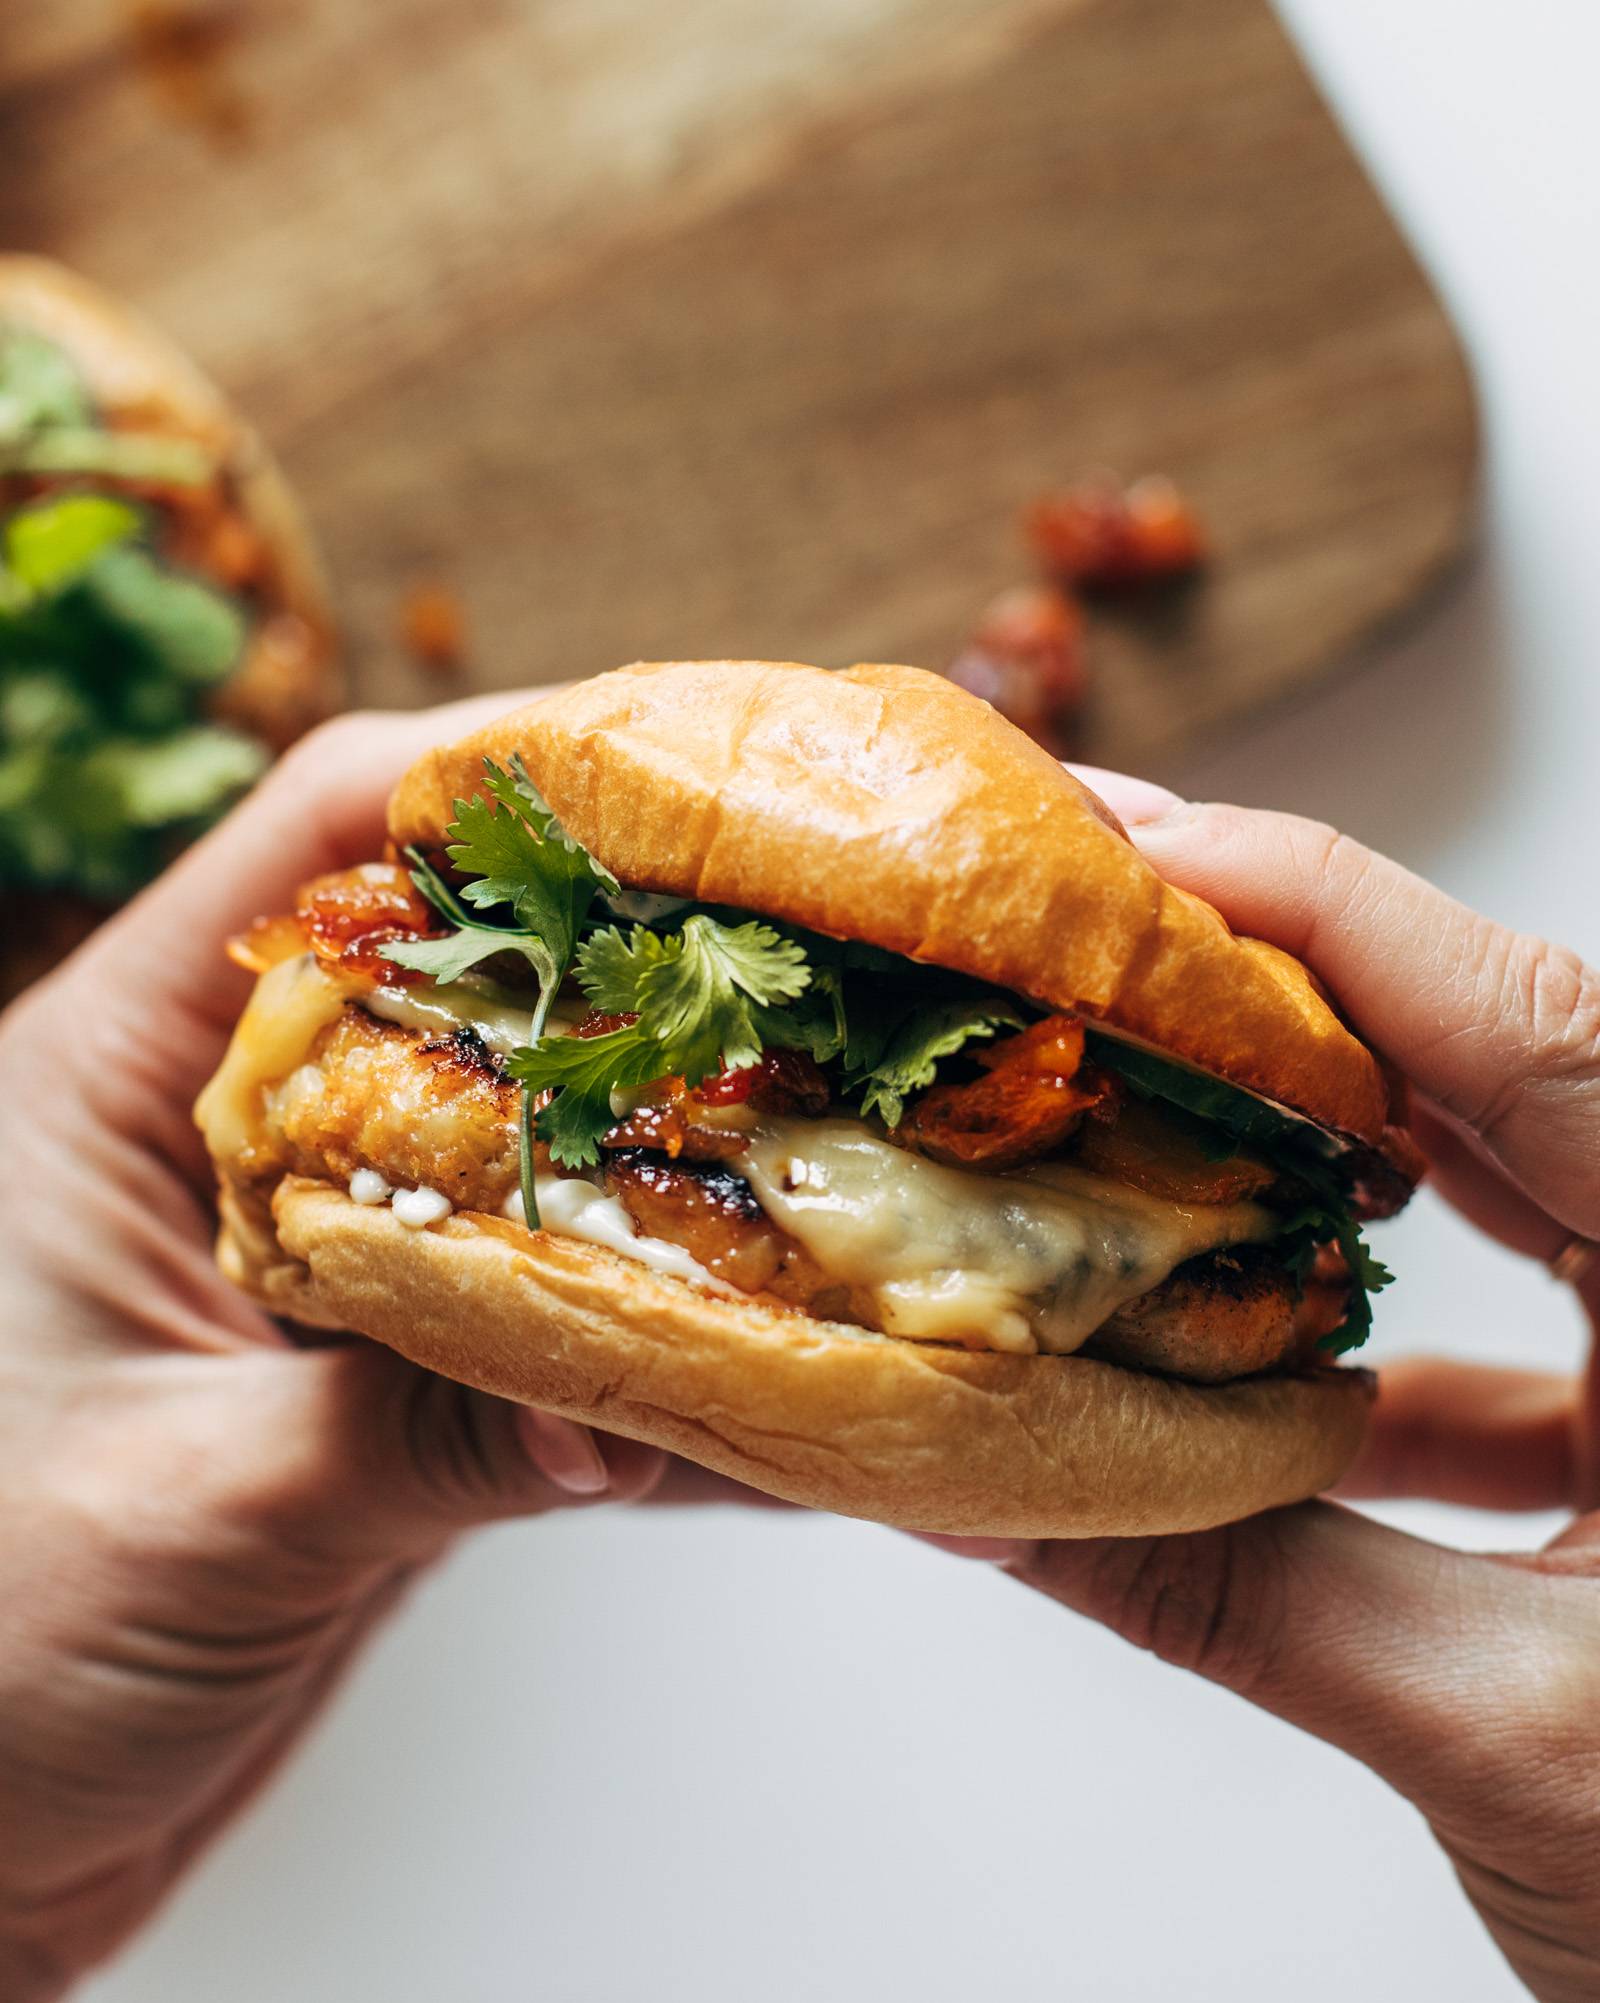 Gochujang burgers with chicken and kimchi held by two hands.